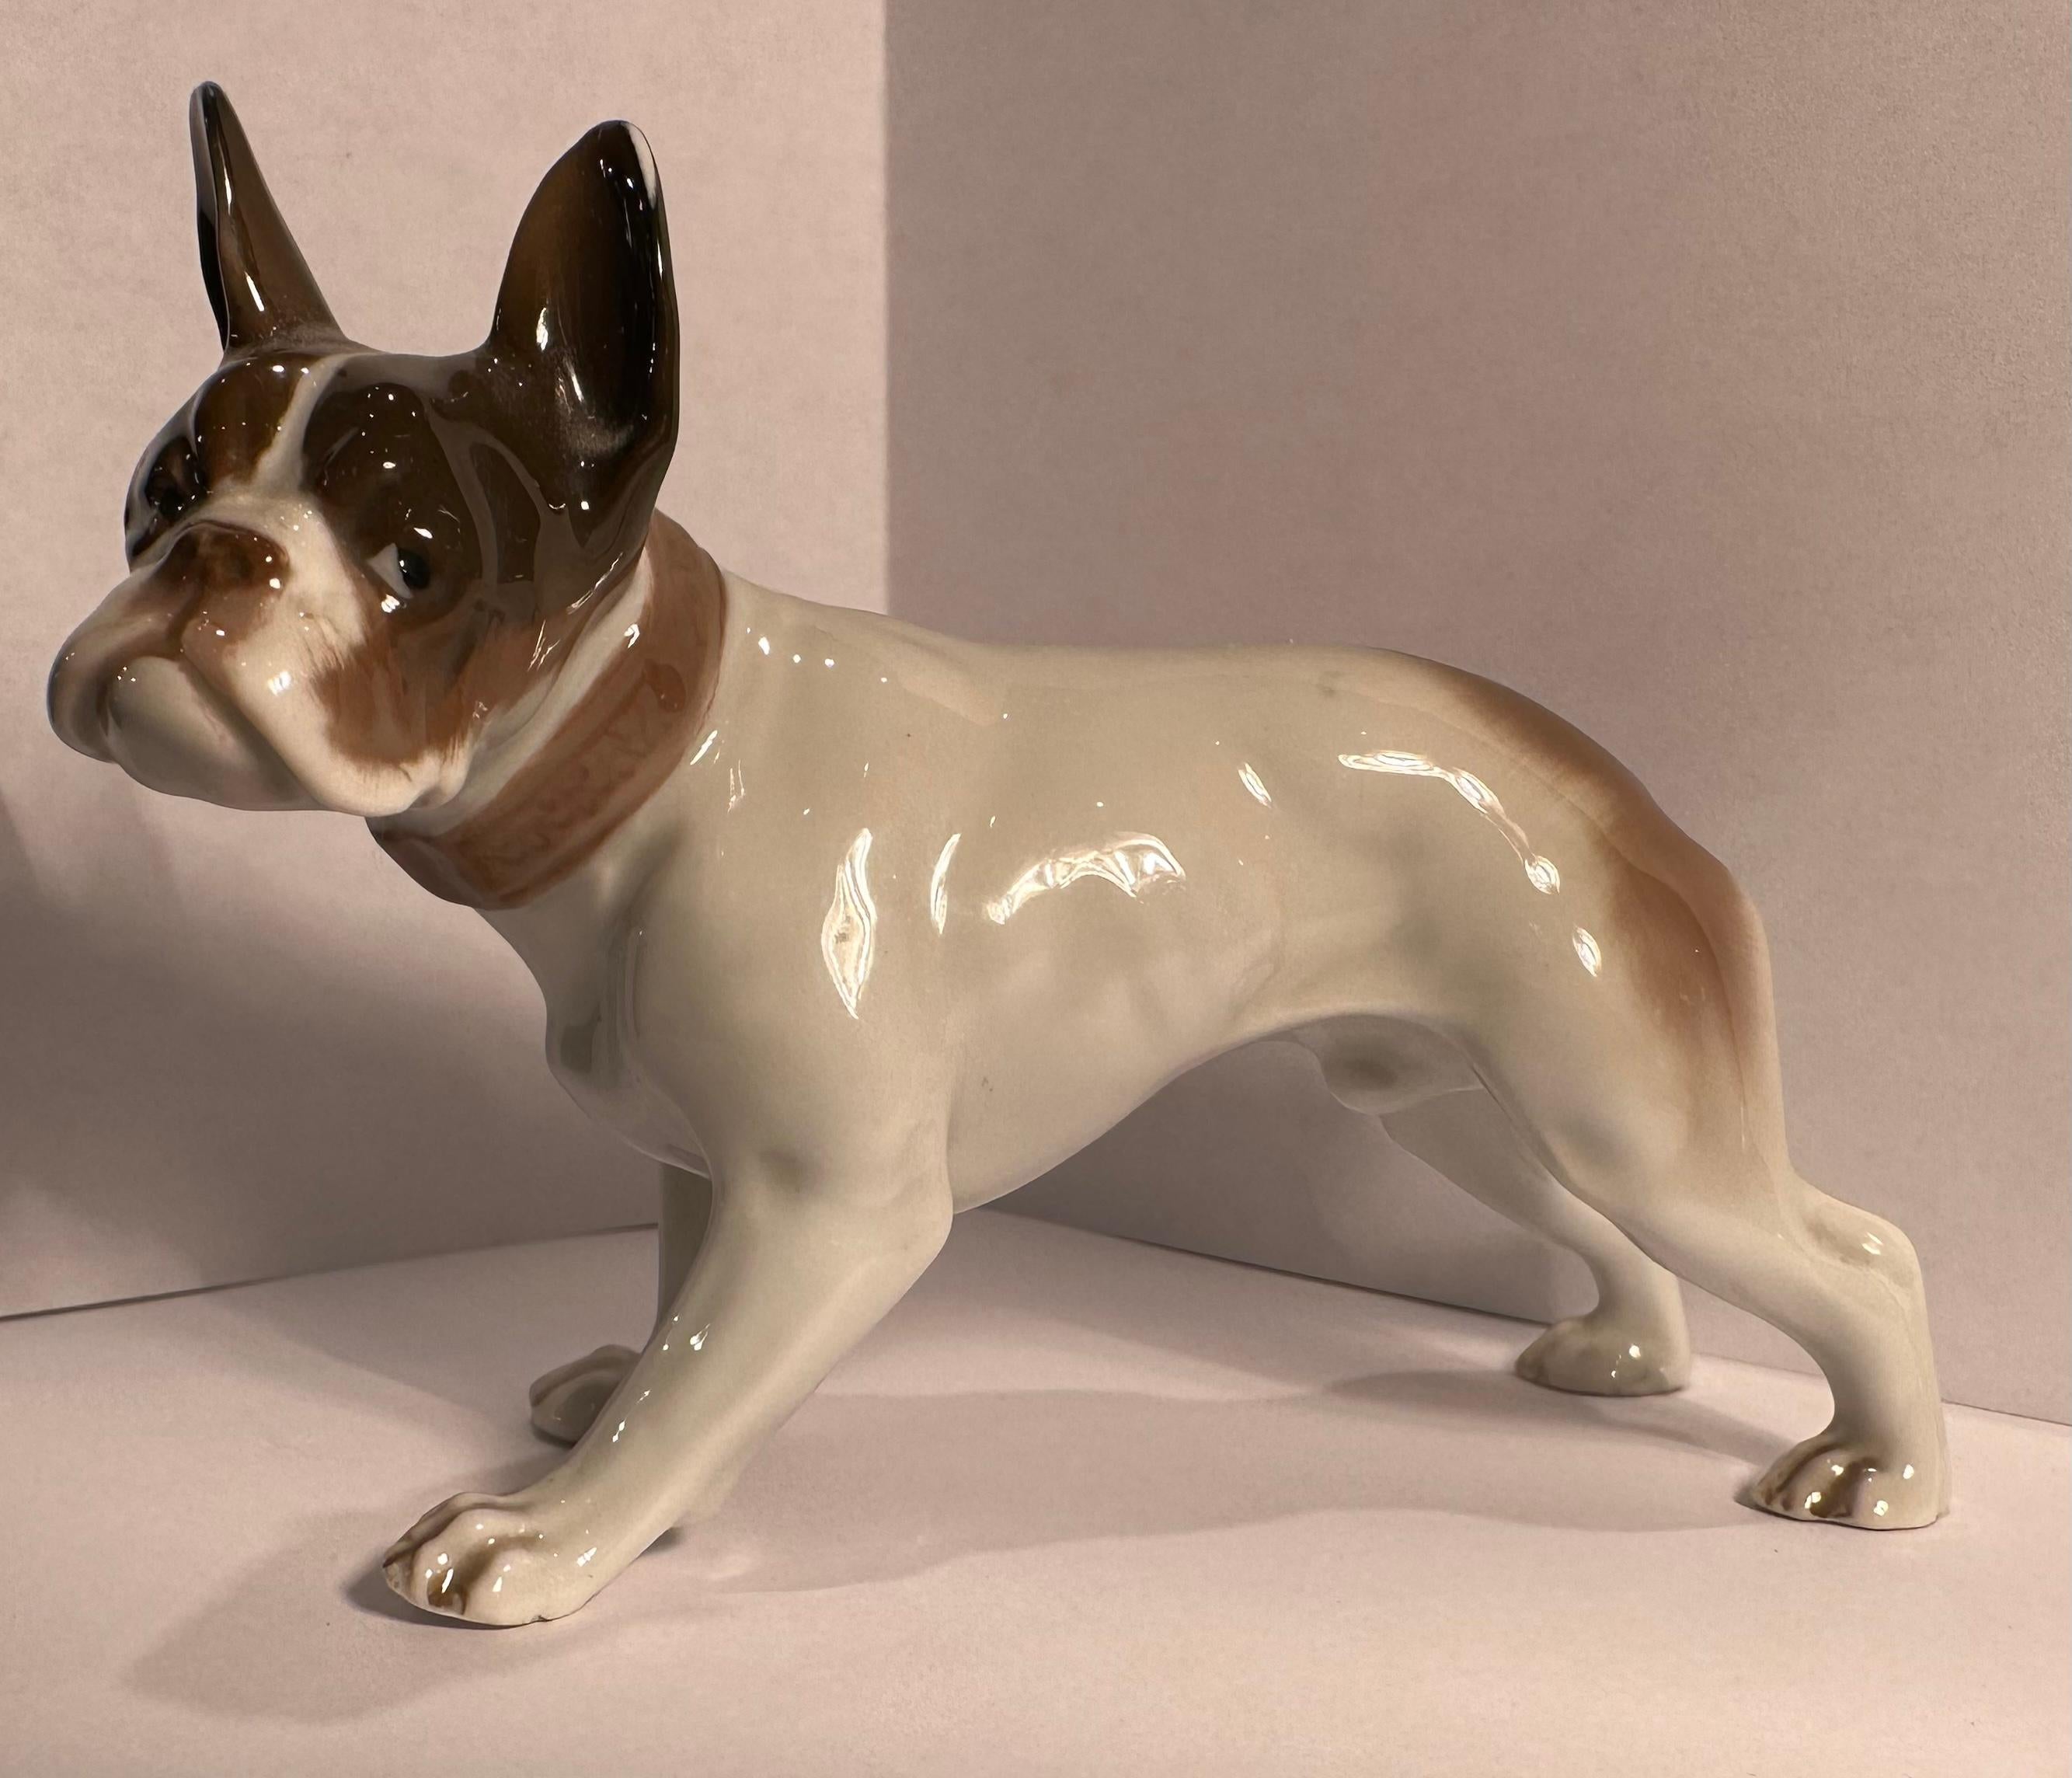 
Finest quality, vintage retired, handmade and hand painted in Germany, Rosenthal porcelain French Bull dog figurine. The dog has been masterfully handmade and hand painted with great attention to detail by a skilled Rosenthal artist. The perfect